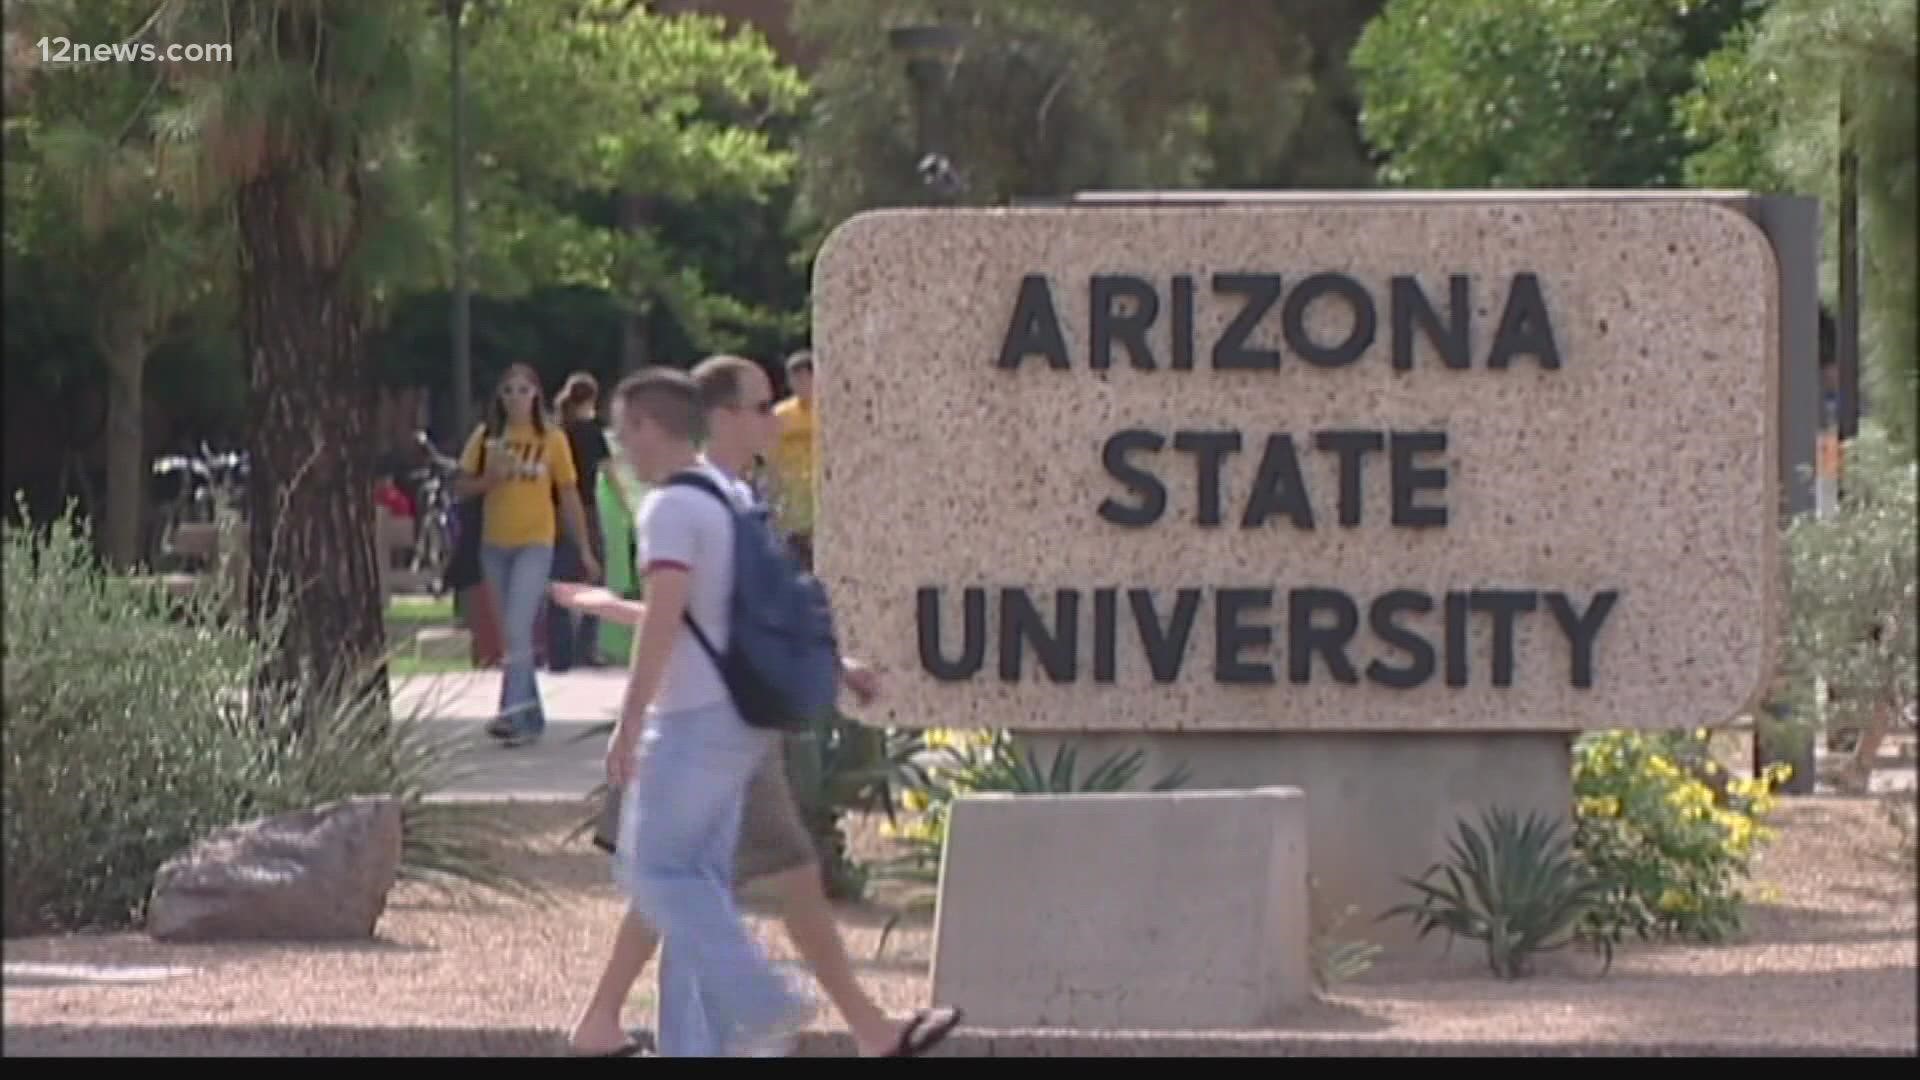 Arizona State University is part of a joint program with the Phoenix Union High School District that hopes to increase accessibility of higher education to students.